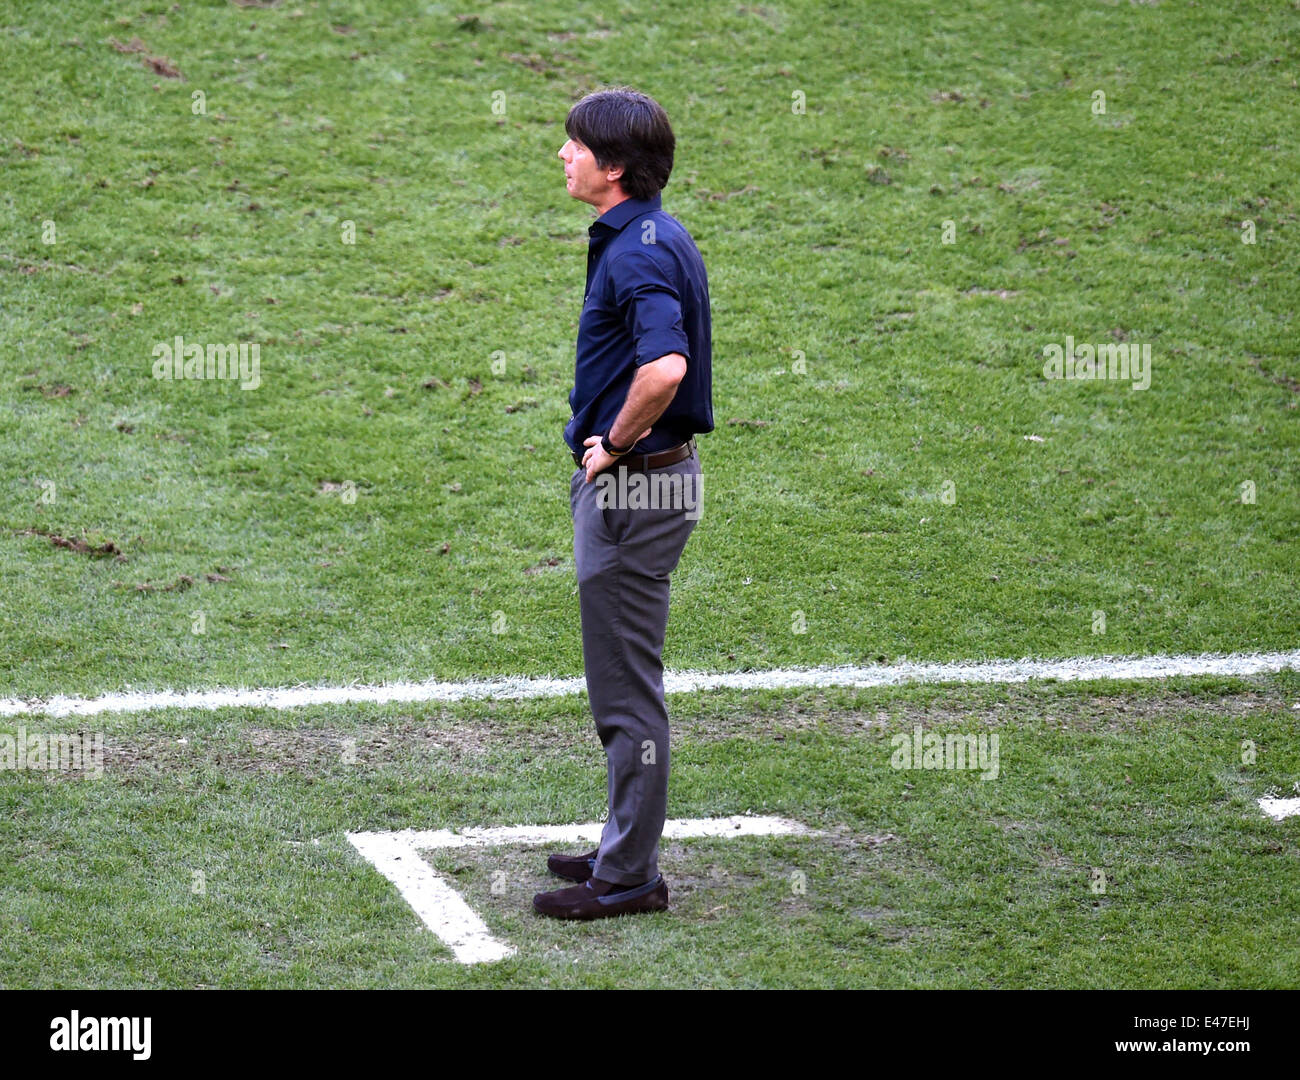 Rio de Janeiro, Brazil. 04th July, 2014. Head coach Joachim Loew of Germany seen during the FIFA World Cup 2014 quarter final soccer match between France and Germany at Estadio do Maracana in Rio de Janeiro, Brazil, 04 July 2014. Photo: Marcus Brandt/dpa/Alamy Live News Stock Photo